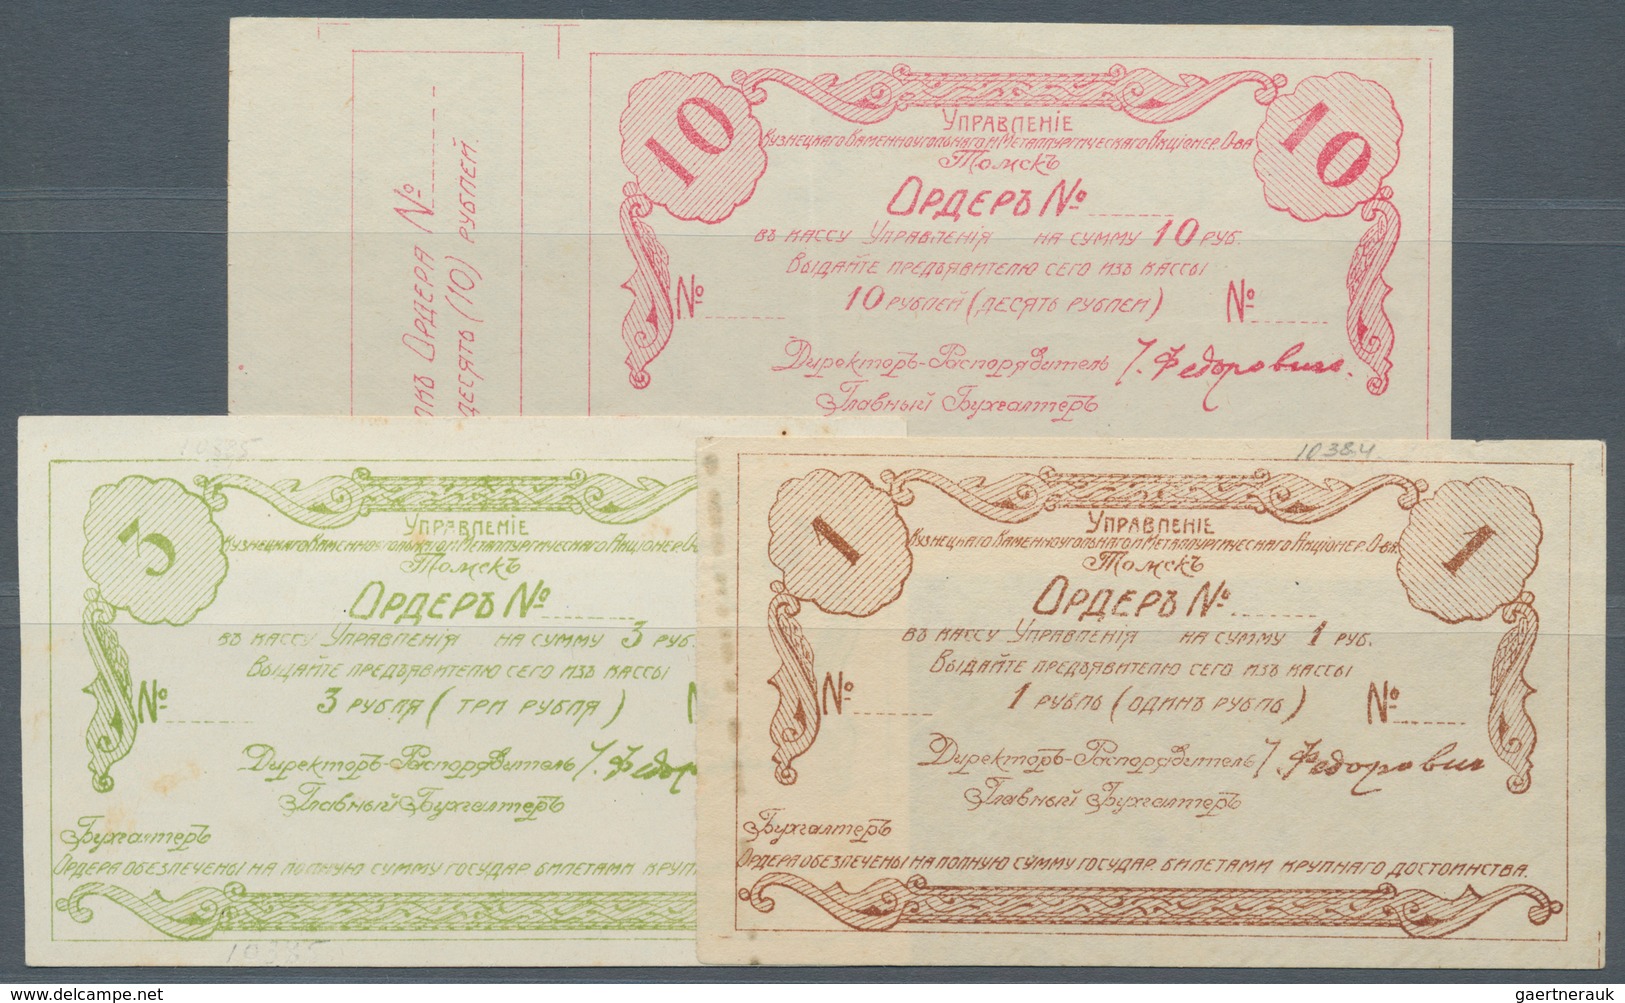 Russia / Russland: Siberia, City Of Tomsk, Set With 3 Vouchers Remainder 1, 3 And 10 Rubles ND, P.NL - Russie